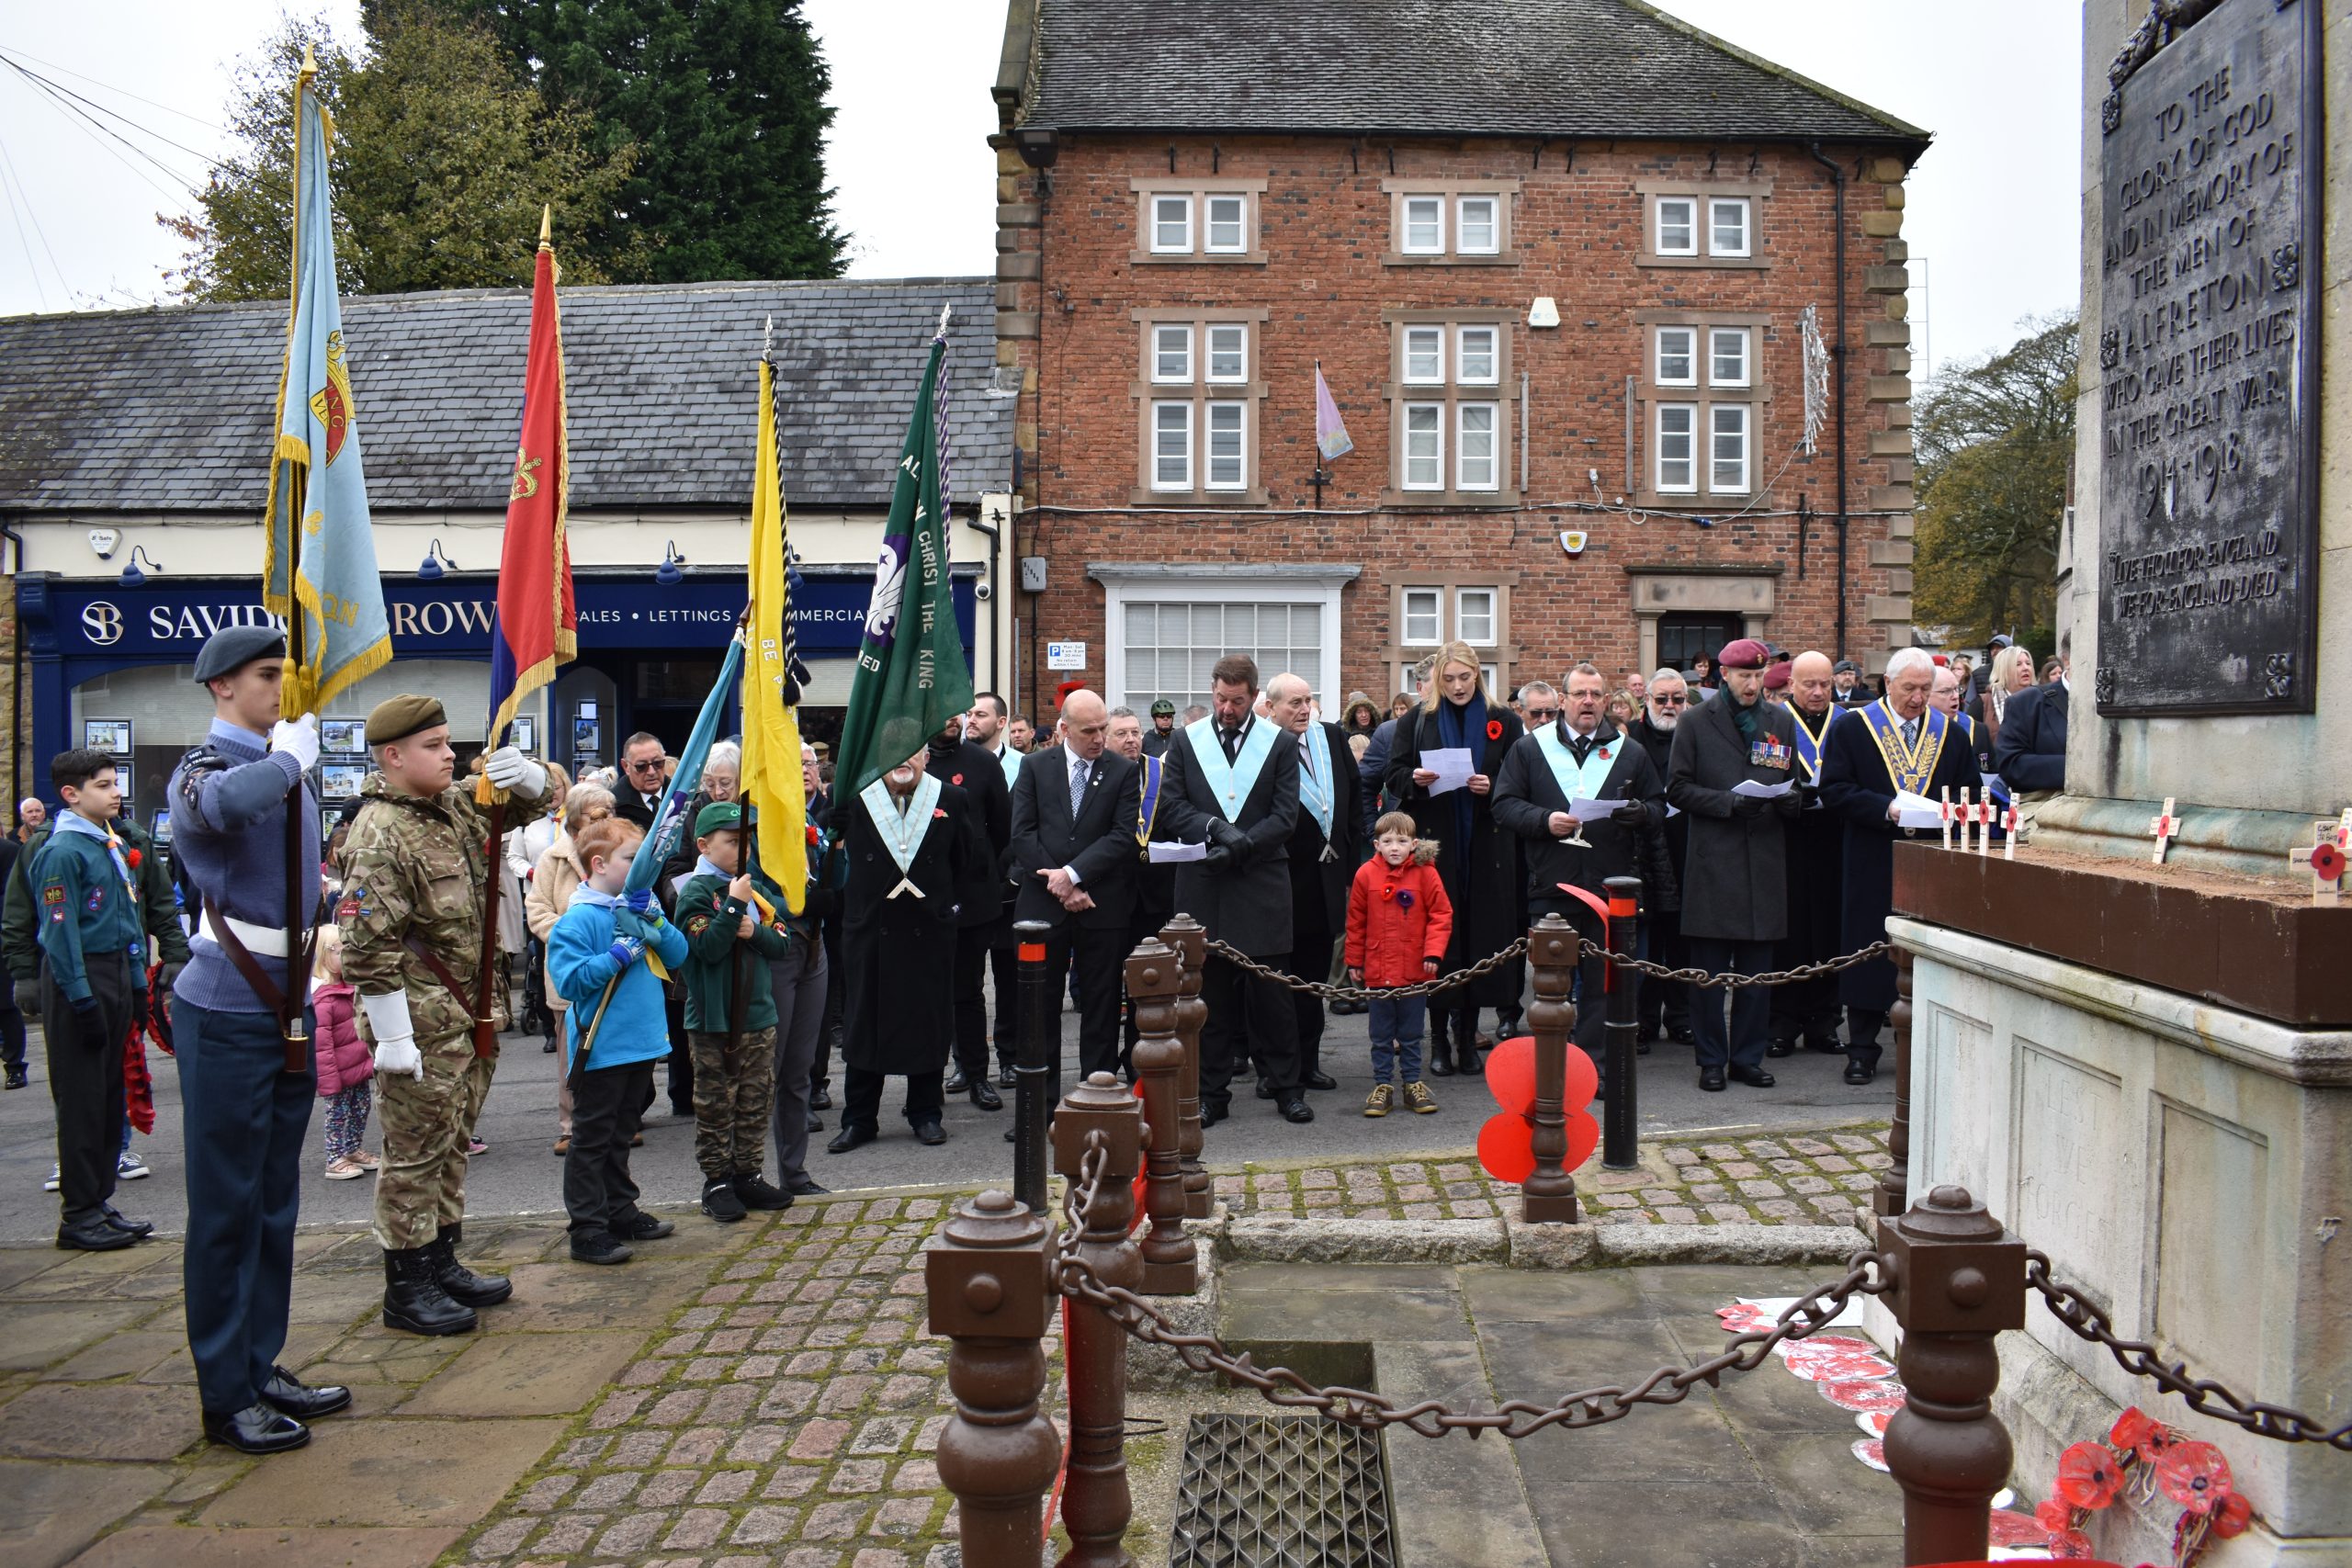 PICTURE GALLERY - Remembrance Sunday in Alfreton